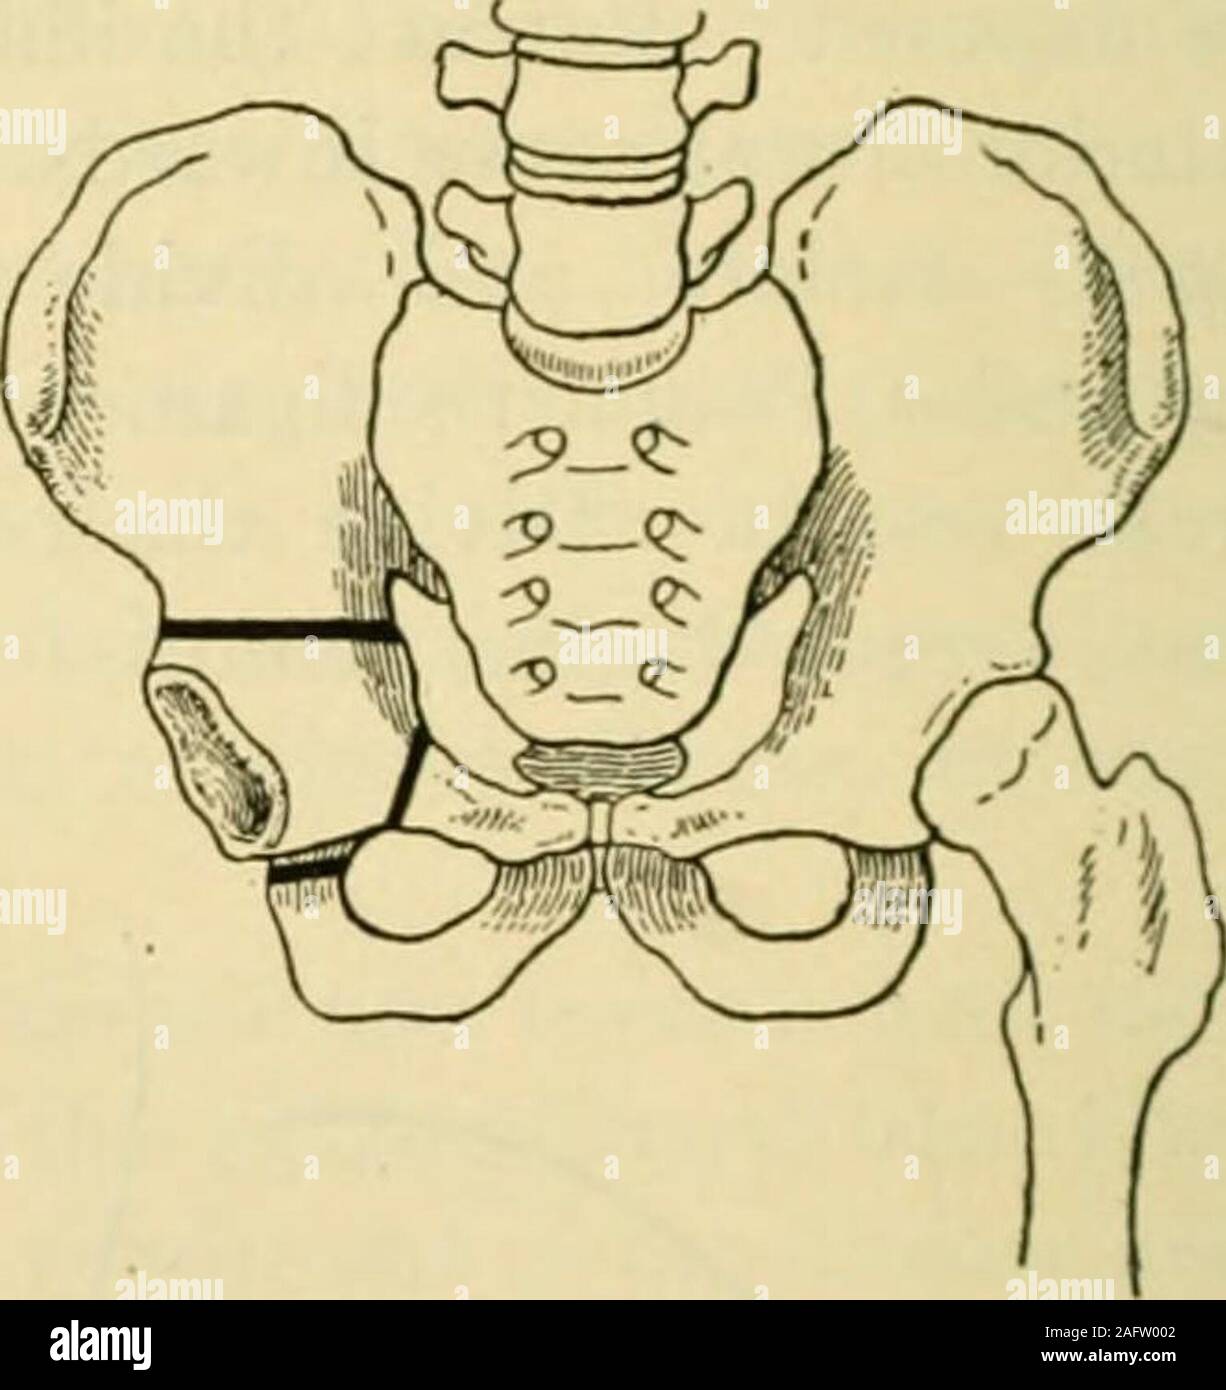 . Manual of operative surgery. Fig. 1193.—Excision of pubis. Fig. 1194.—Excision of acetabulum. Excision of Symphysis Pubis.—Tuberculous osteomyelitis affecting thepubic bones and the symphysis calls for early operation. The disease may beexposed by an incision directly over it; all affected bone cut away with chisel andmallet and all abscesses opened and curetted. If no distinct and separatedsequestrum is present v. Bunger recommends that a transverse incision be madeimmediately above the pubis, the soft parts separated and the bone dividedsubperiosteally beyond the disease (Fig. 1193). The r Stock Photo